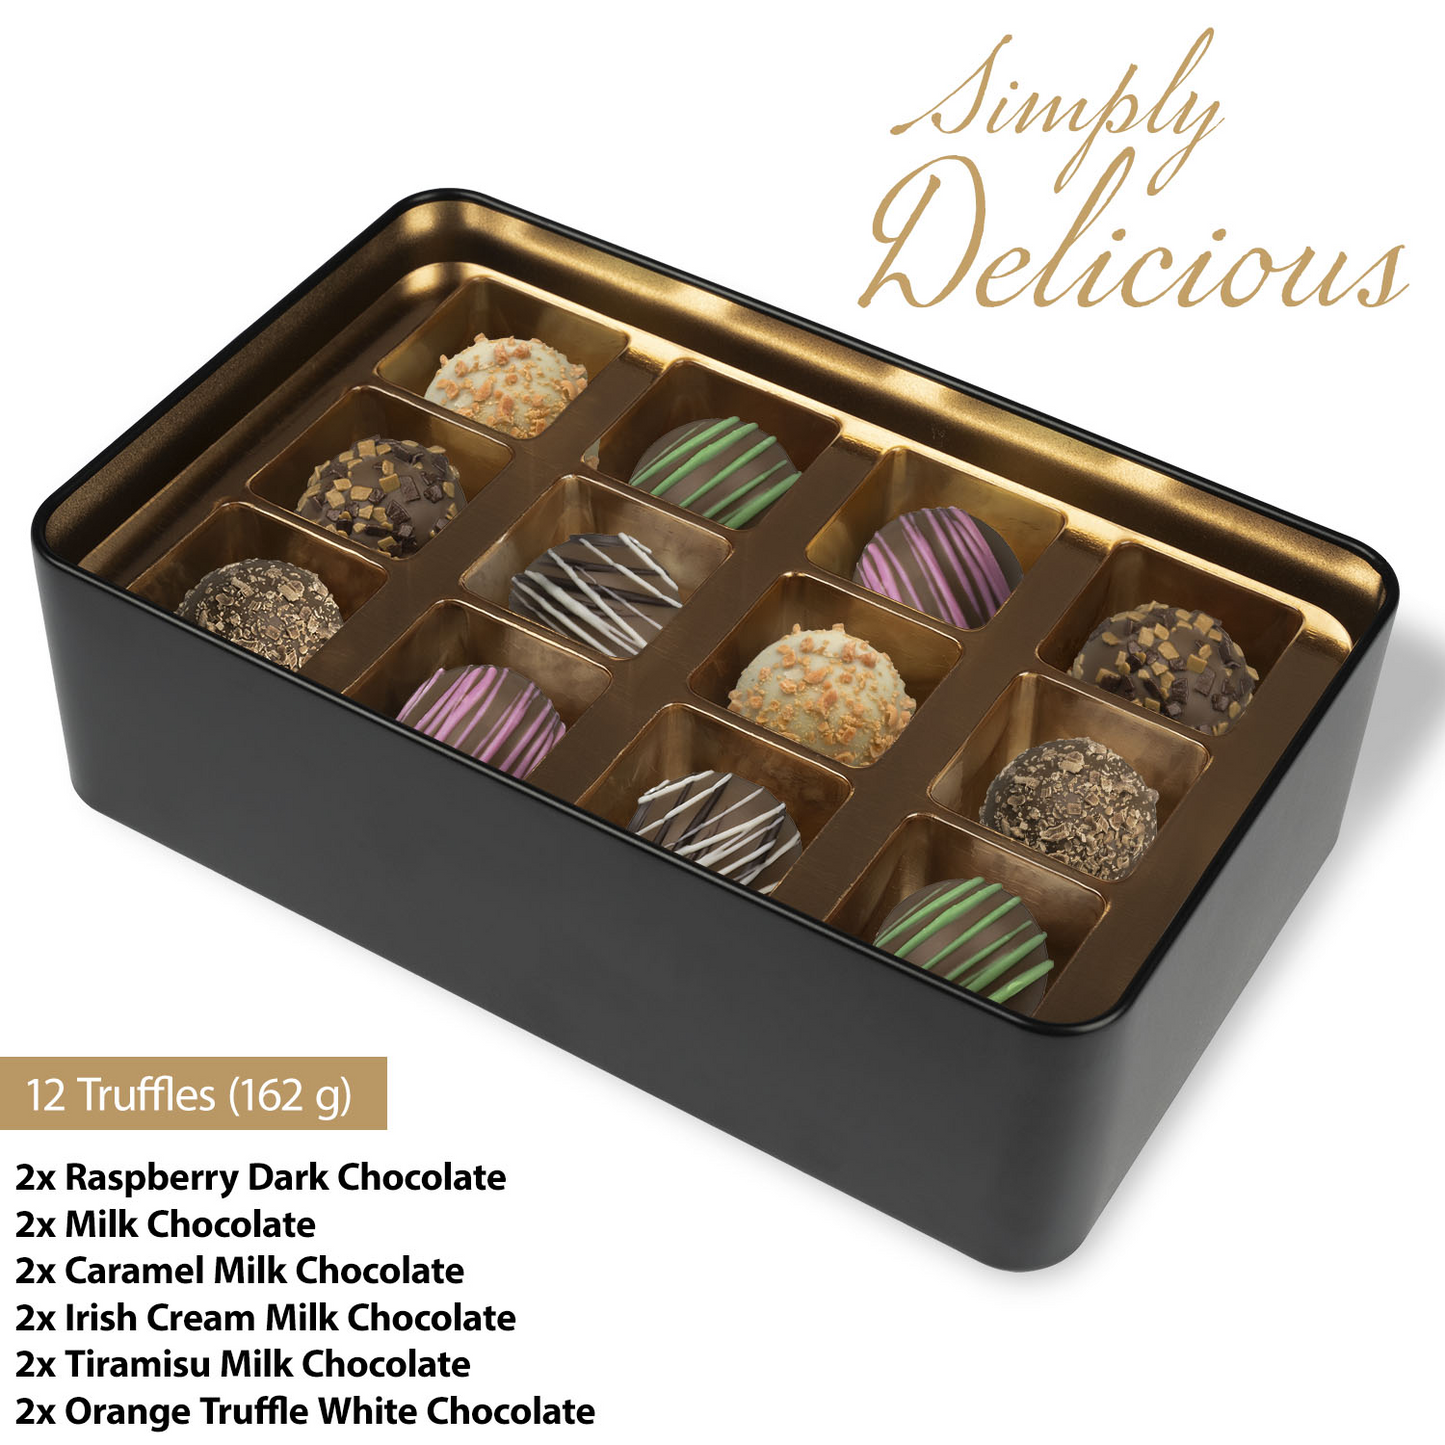 You Got This! Motivational Truffle Box - Assorted Flavors in Vibrant Keepsake Tin